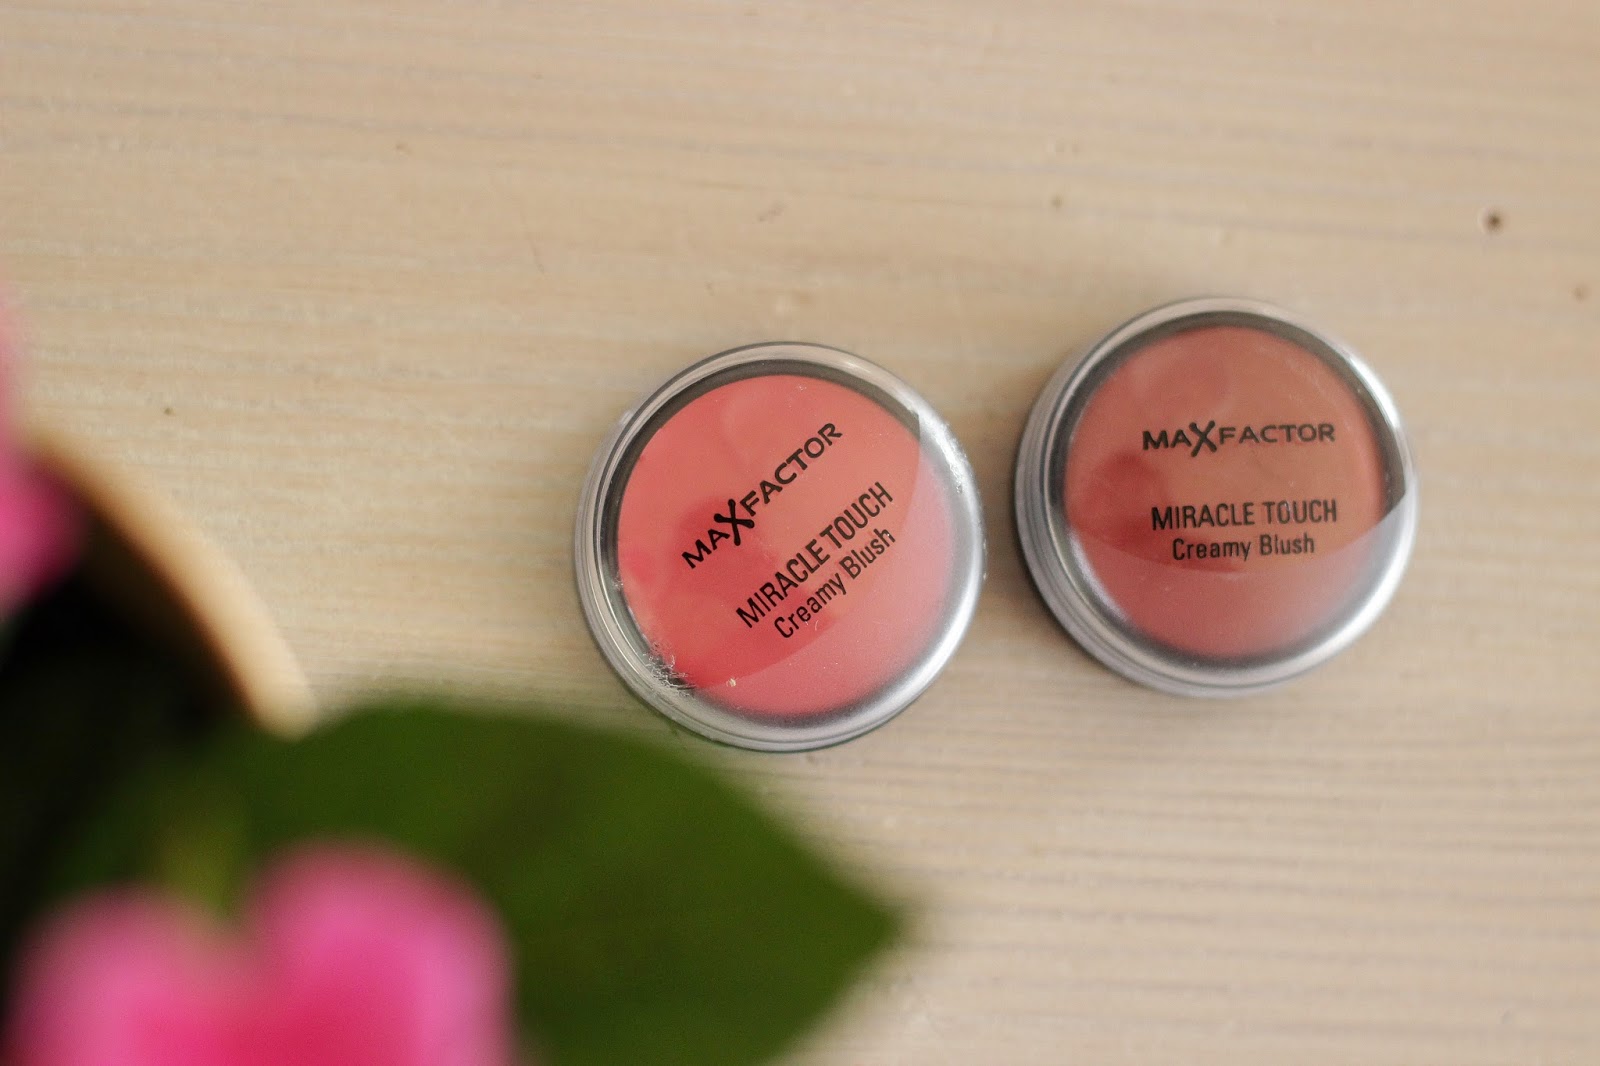 max factor miracle touch creamy blush review, max factor miracle touch creamy blush soft pink soft murano